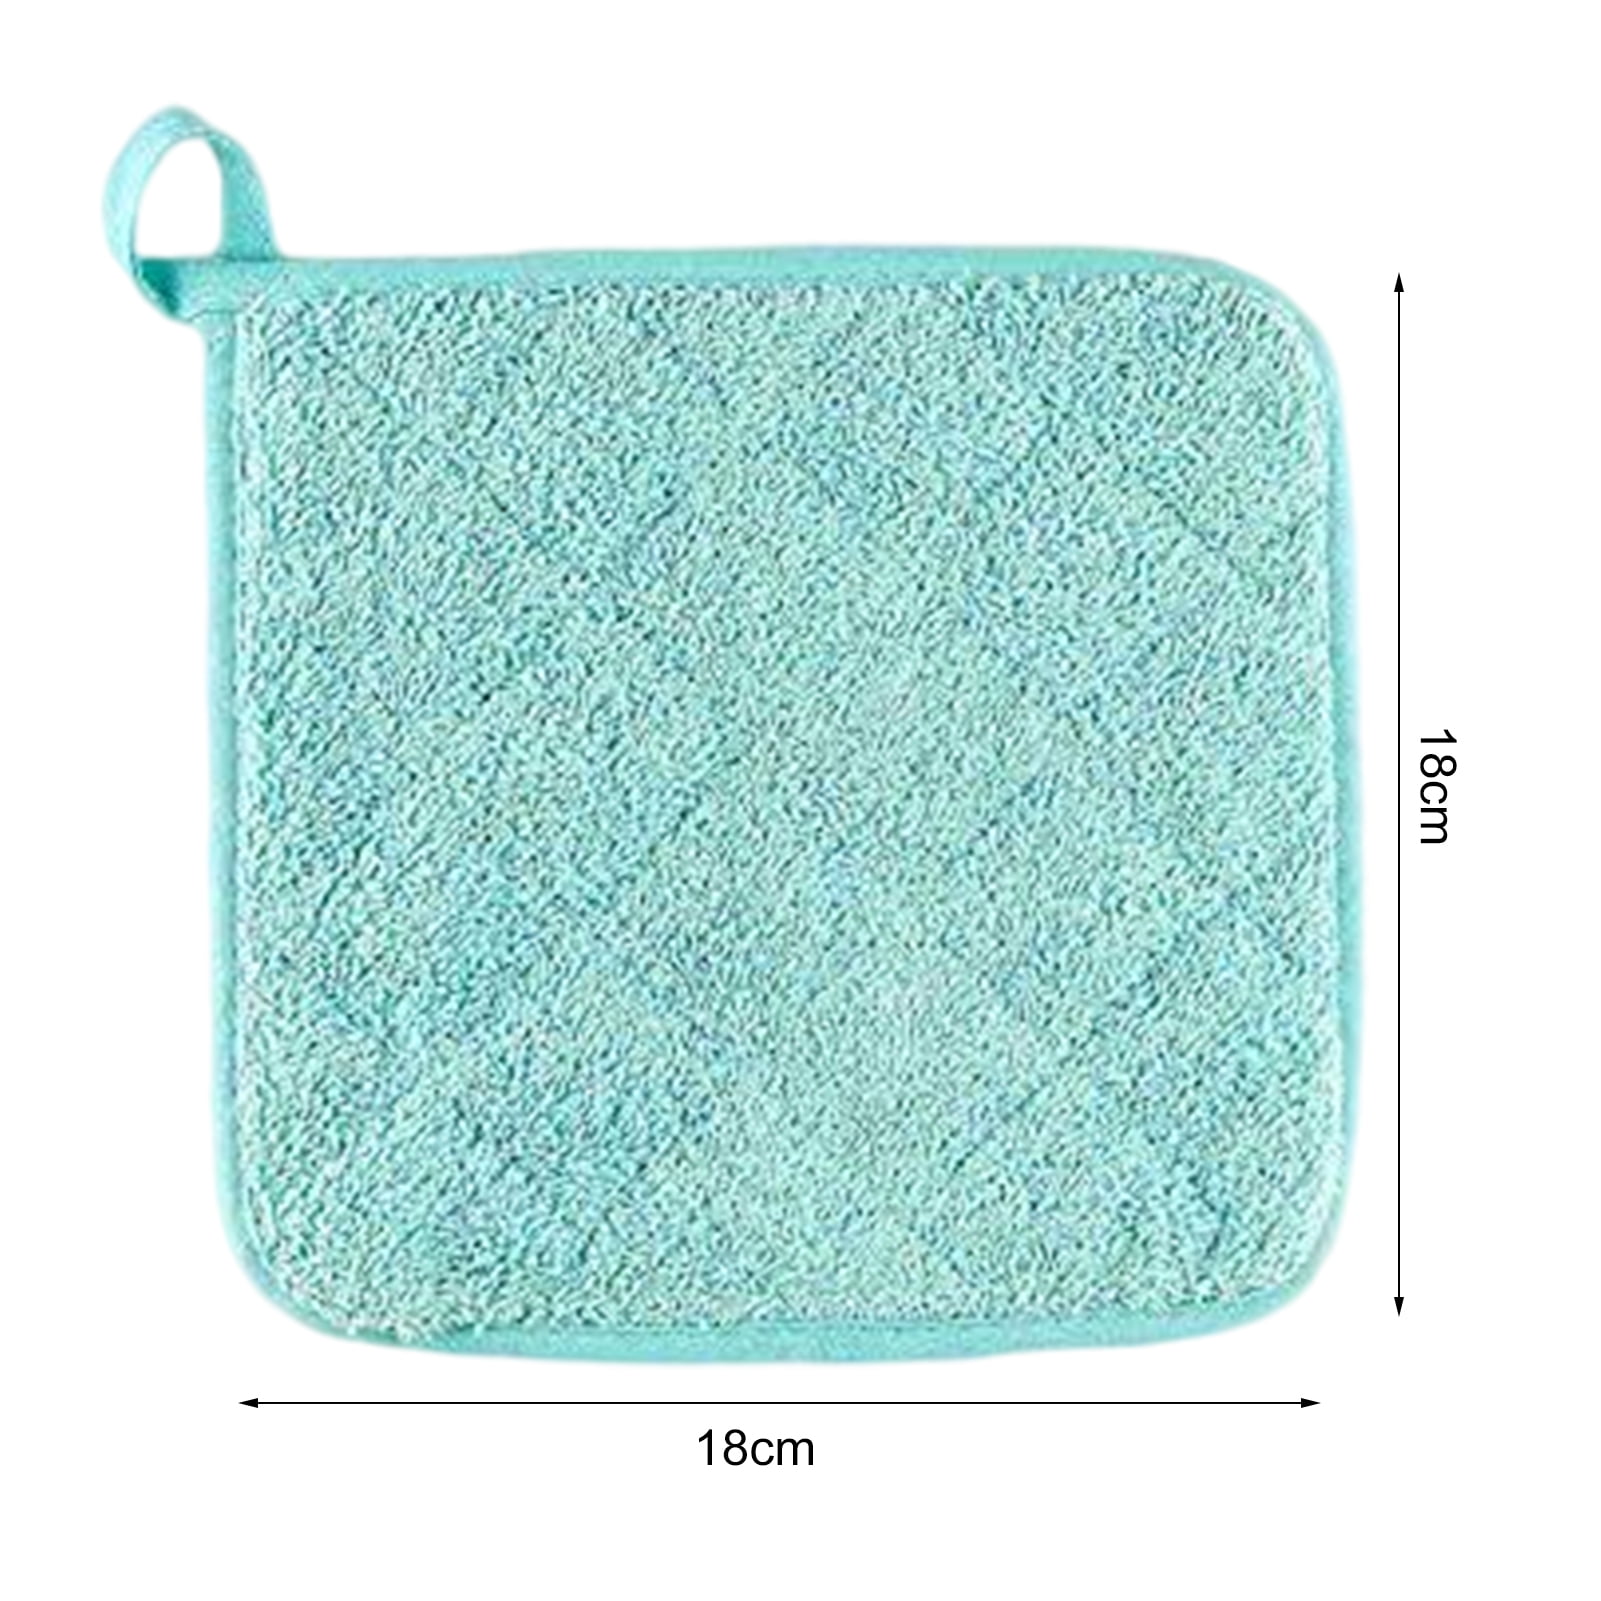 Travelwant 2pcs Pot Holders with Pocket- Soft Cotton Hot Pads with Non-Slip Silicone Grip and Hanging Loop - Heat Resistant Kitchen Potholders Trivet